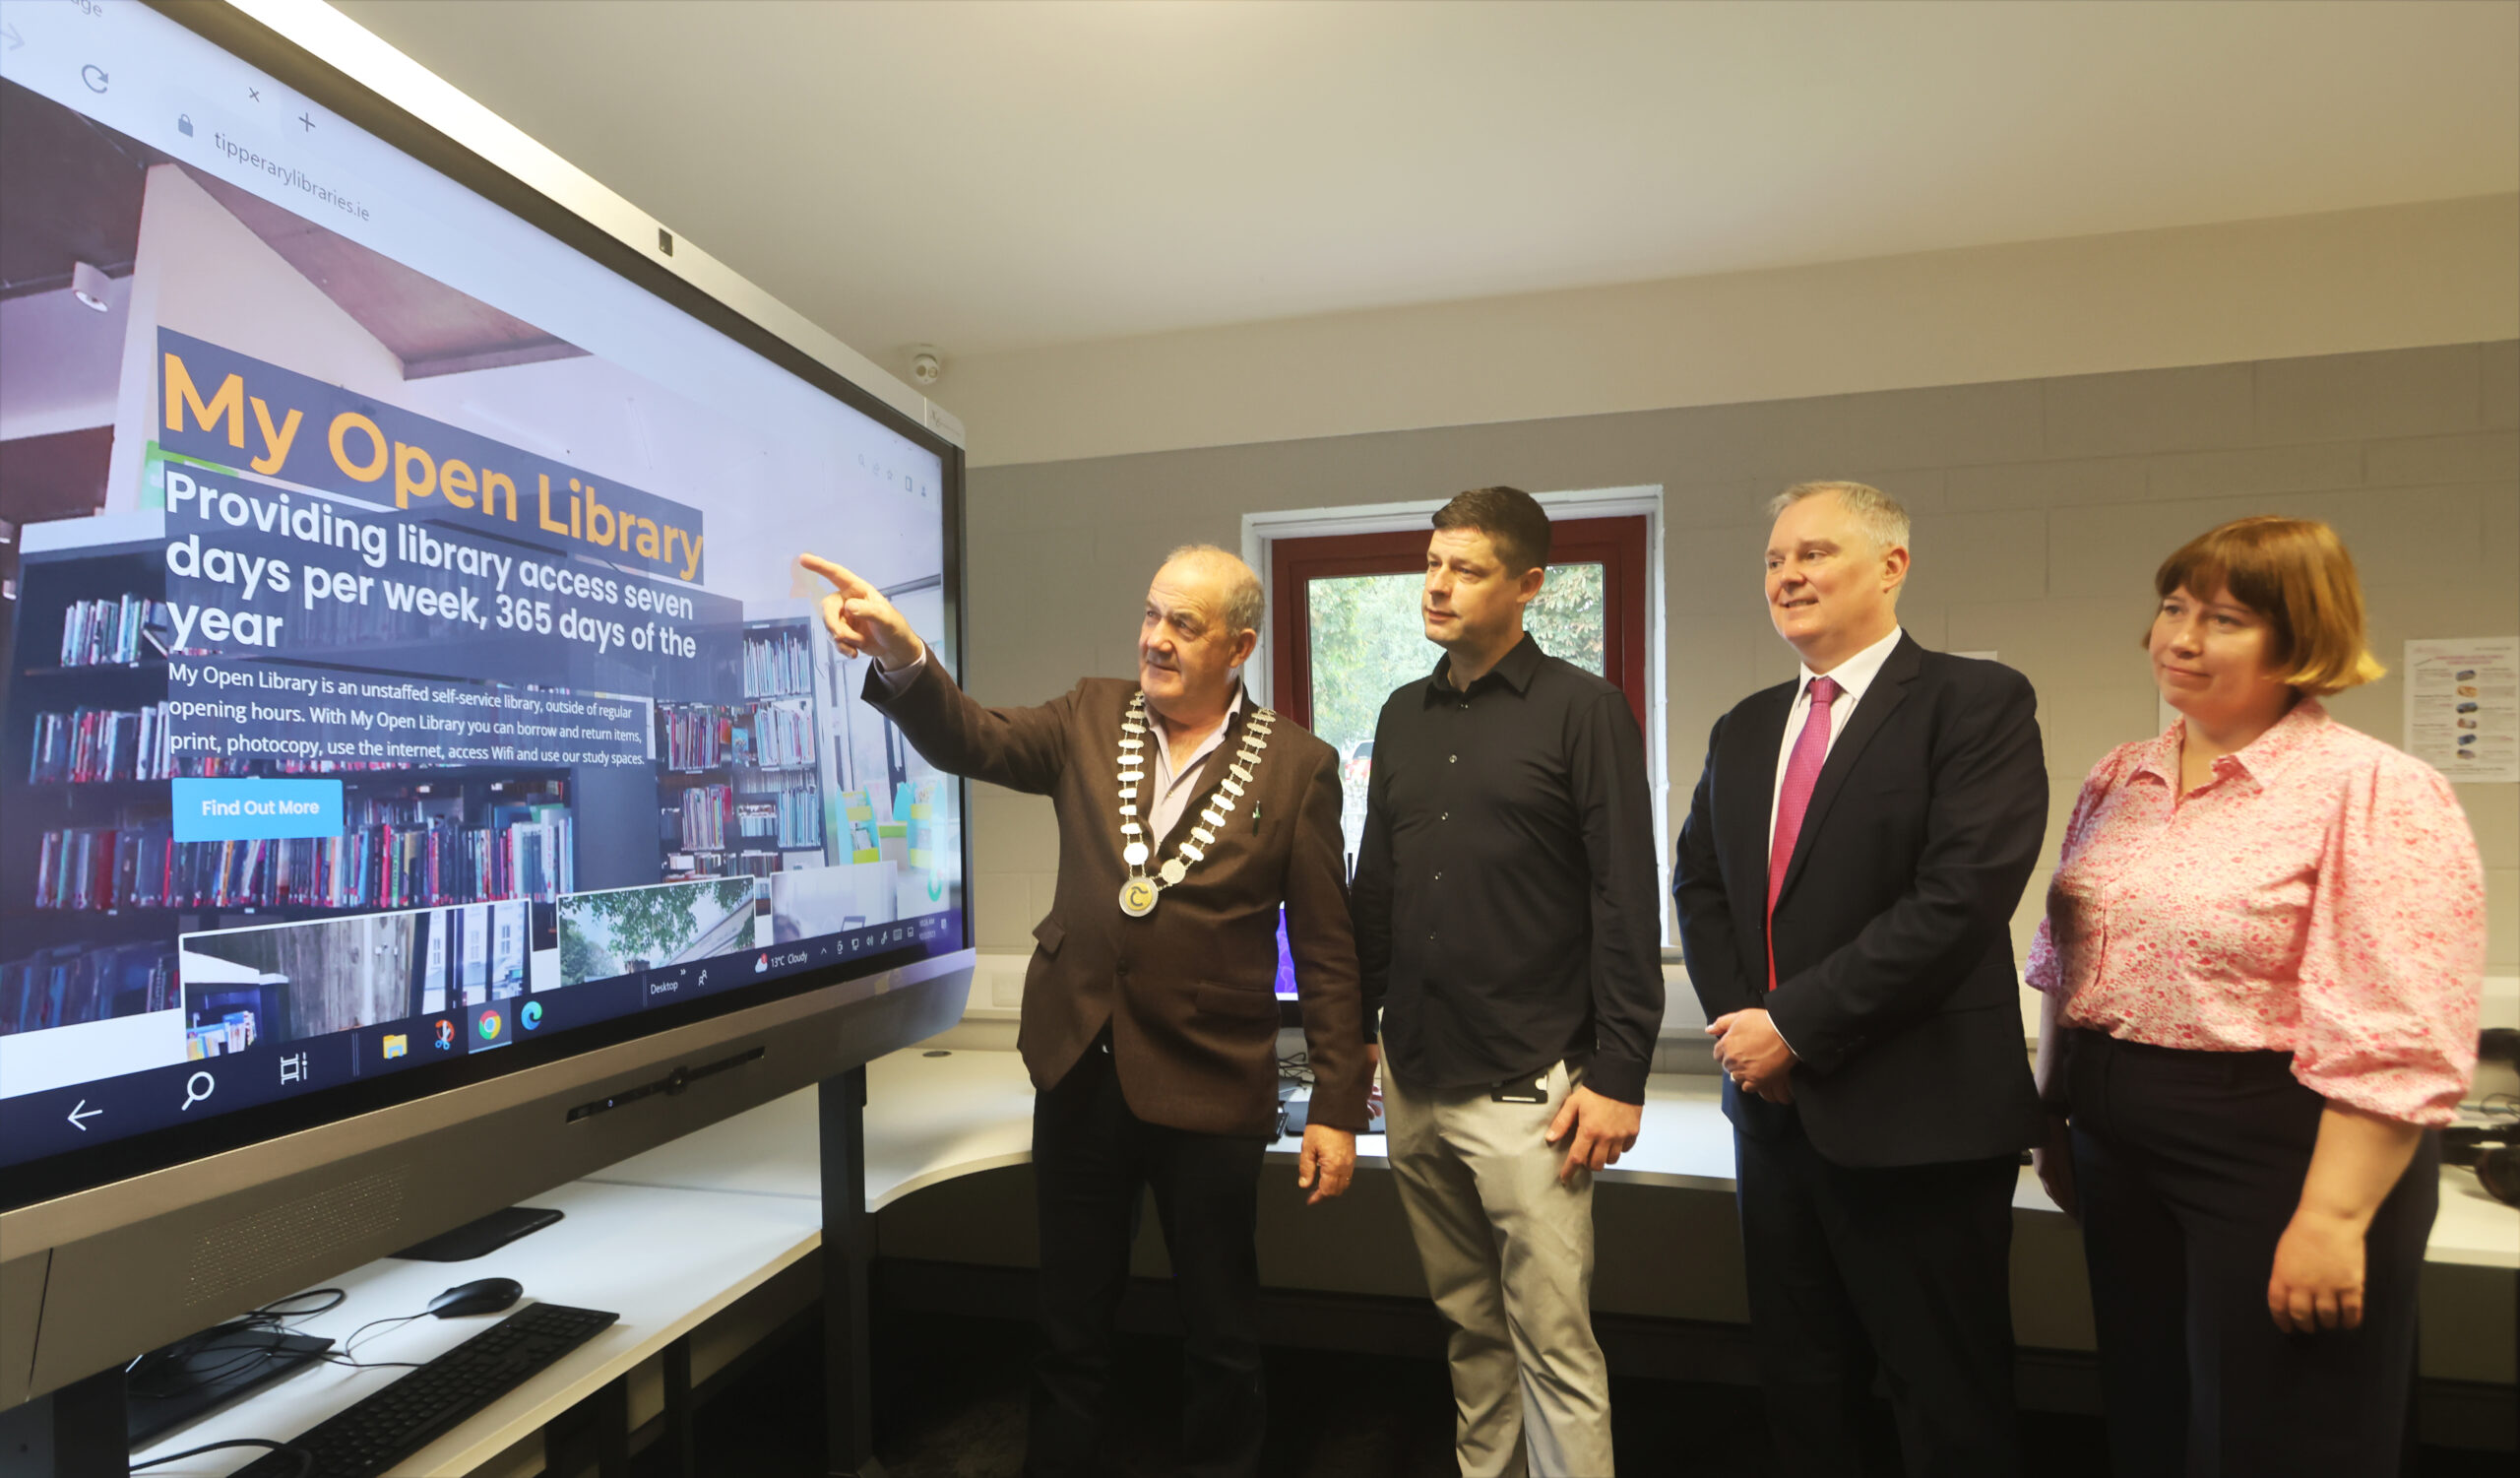 A picture of Councillor Ger Darcy, Library Assistant Greg MacDonald, County Librarian Damien Dullaghan and Senior Executive Librarian Ann Marie Brophy launching the new library website in Nenagh library.